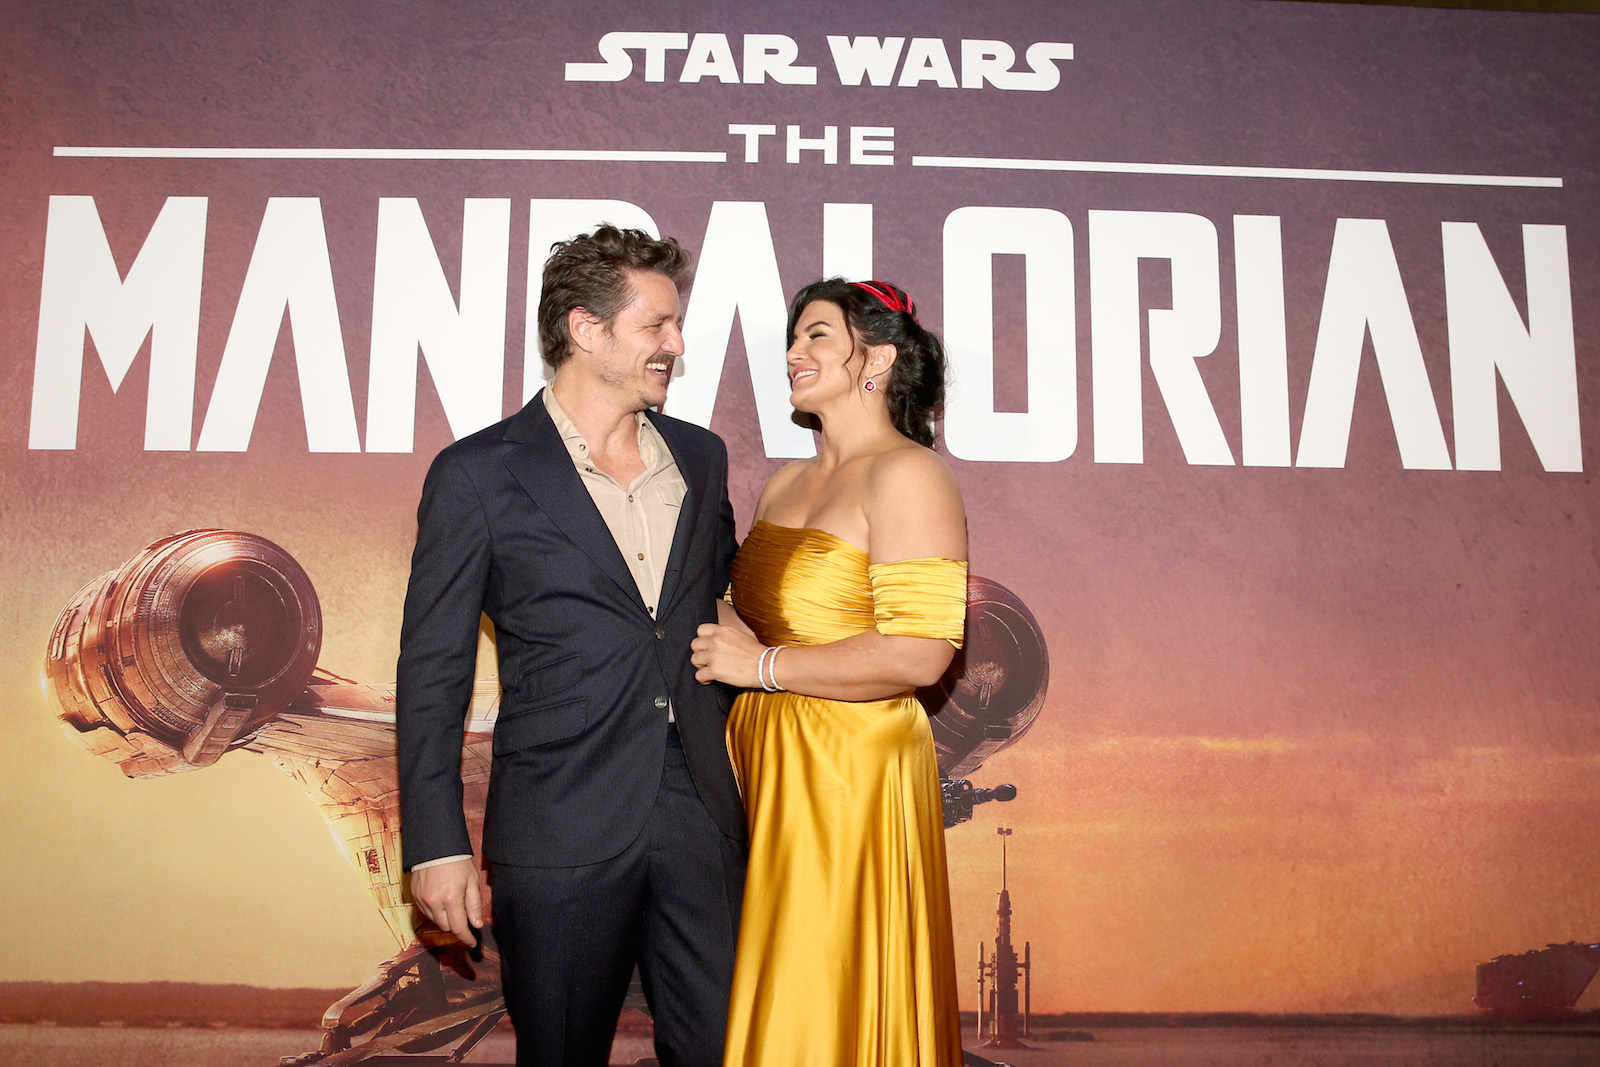 Pedro Pascal and Gina Carano arrive at the premiere of Lucasfilm's 'The Mandalorian'